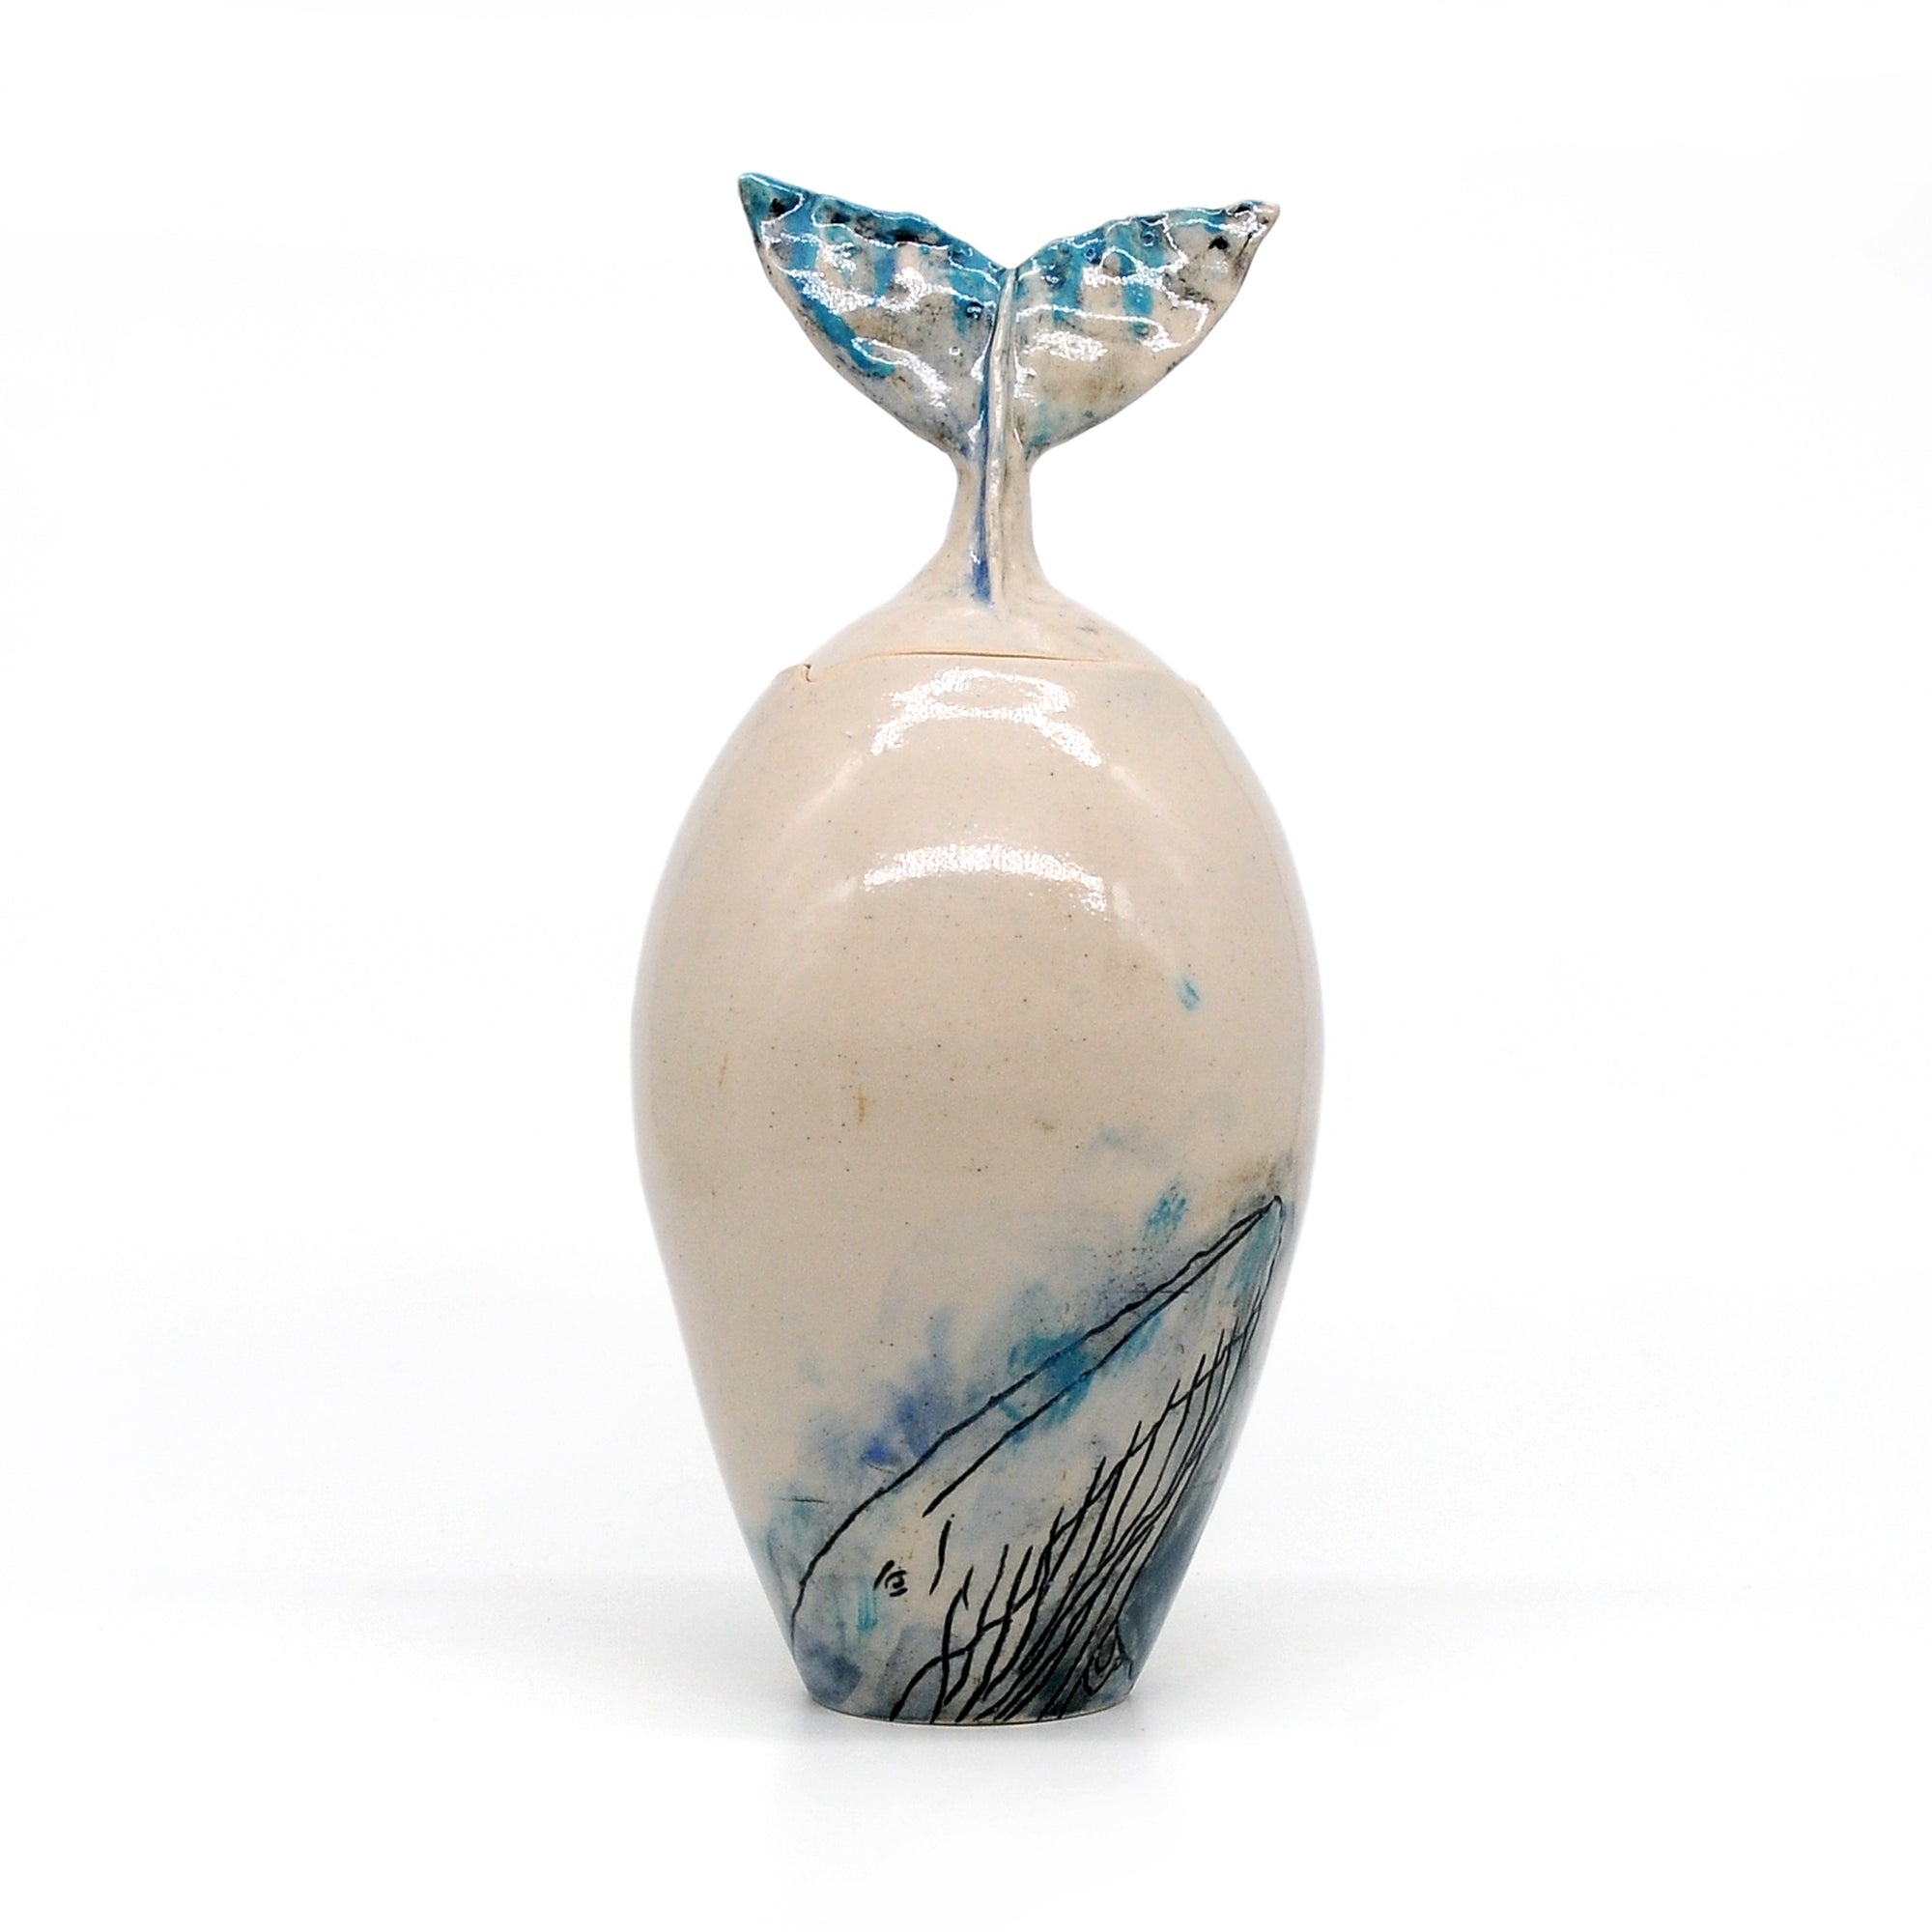 'MK21 Whale’ by Miae Kim ceramics, available at Padstow Gallery, Cornwall